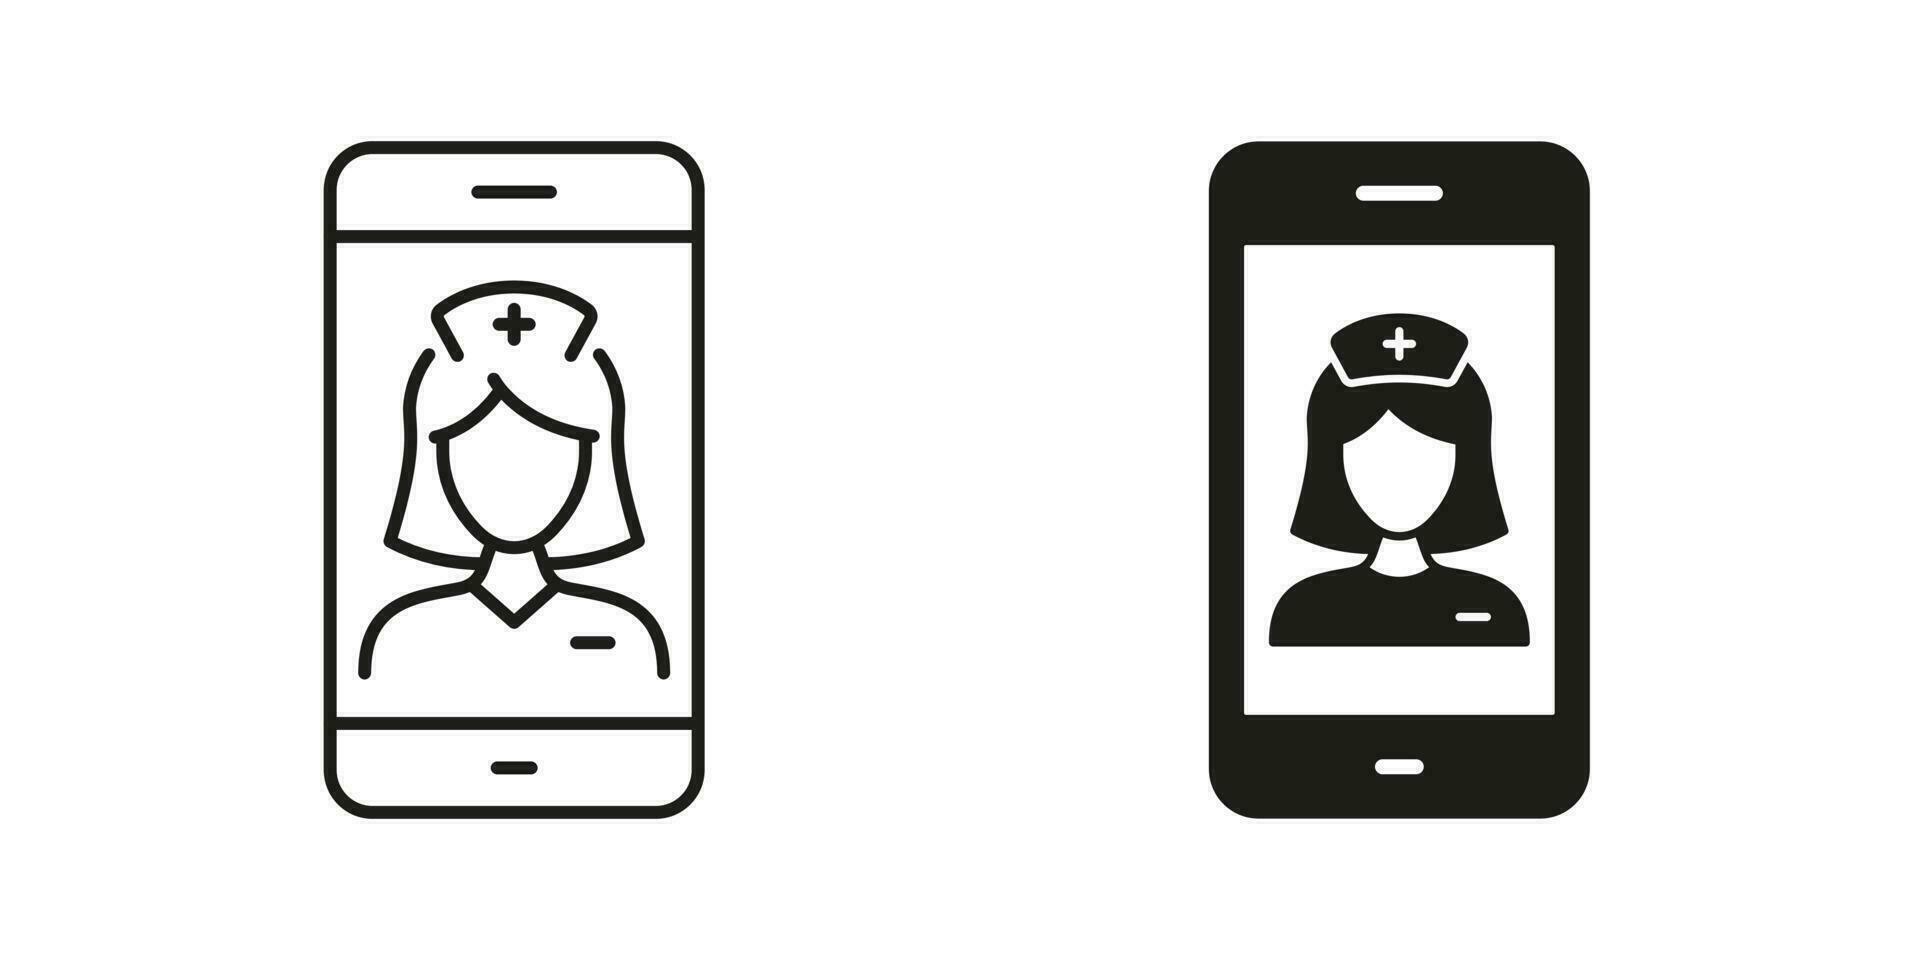 Healthcare in Mobile Phone Symbol Collection. Physician Online Consultation. Virtual Doctor Woman Pictogram. Medical Service in Smartphone Line and Silhouette Icon Set. Isolated Vector Illustration.